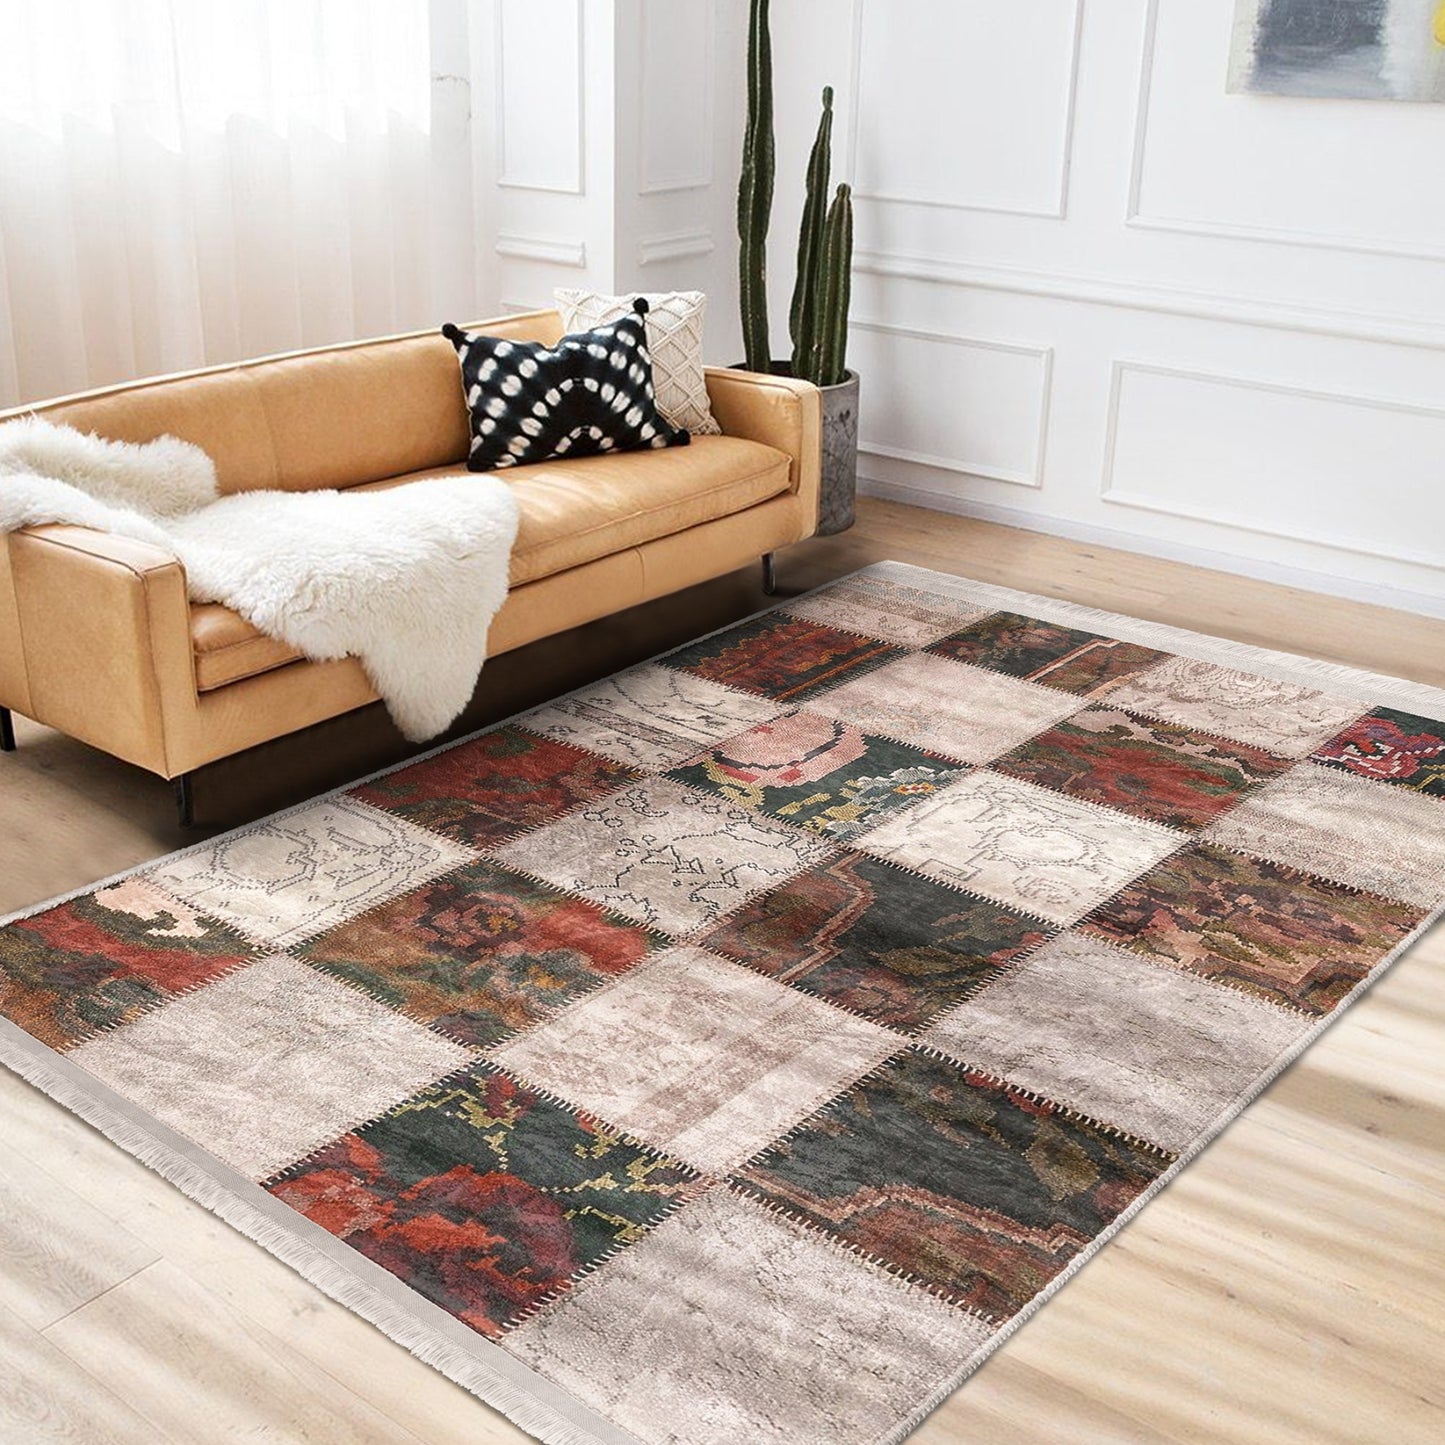 Classic and Comfortable Rug for a Stylish Living Space